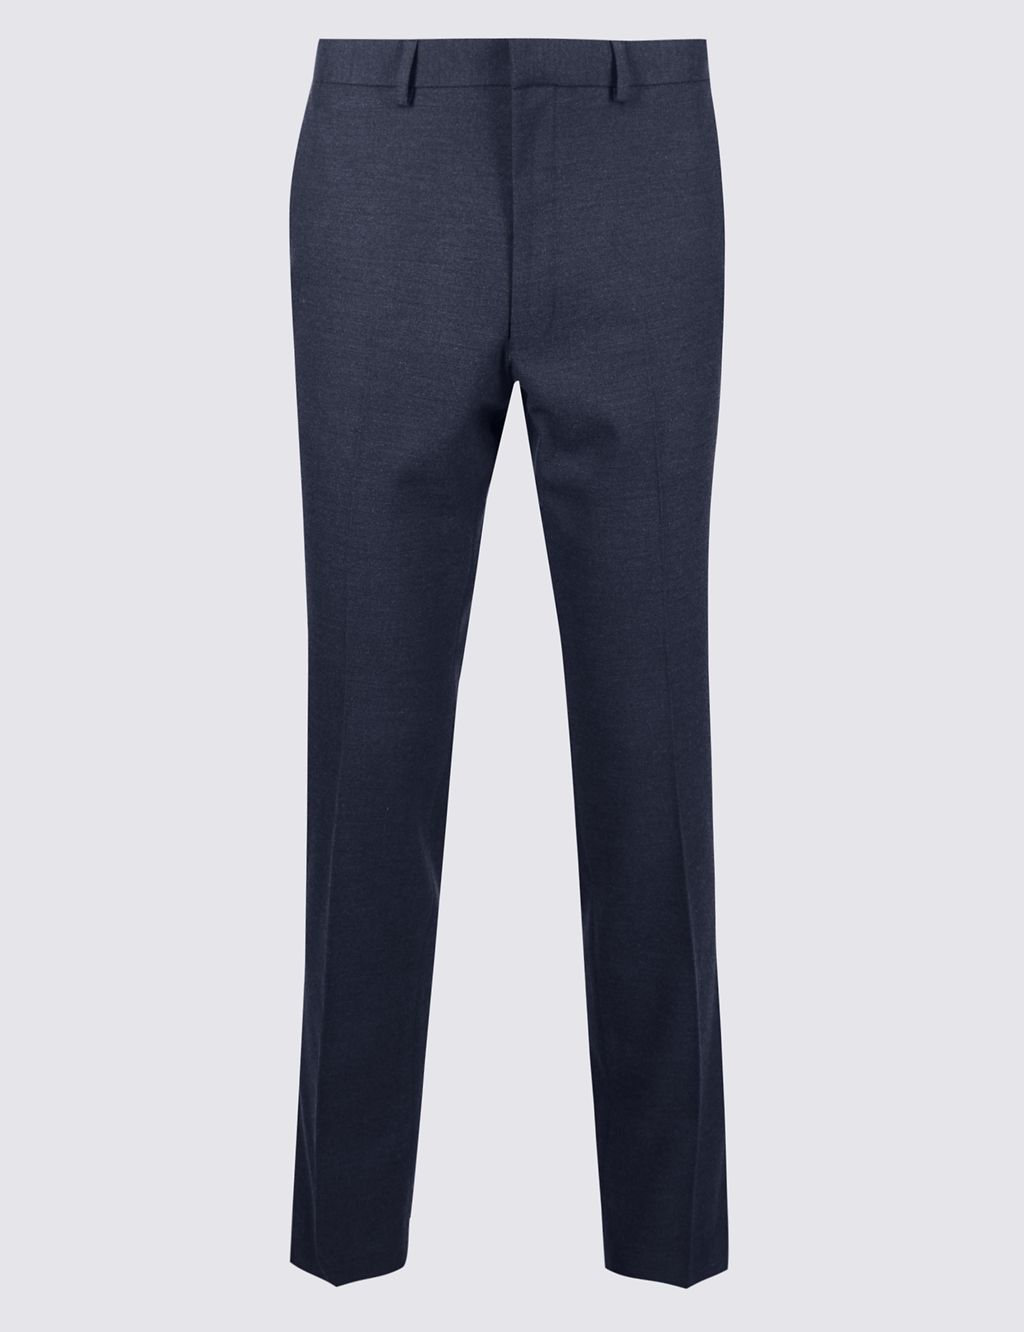 Blue Textured Slim Fit Trousers 1 of 6